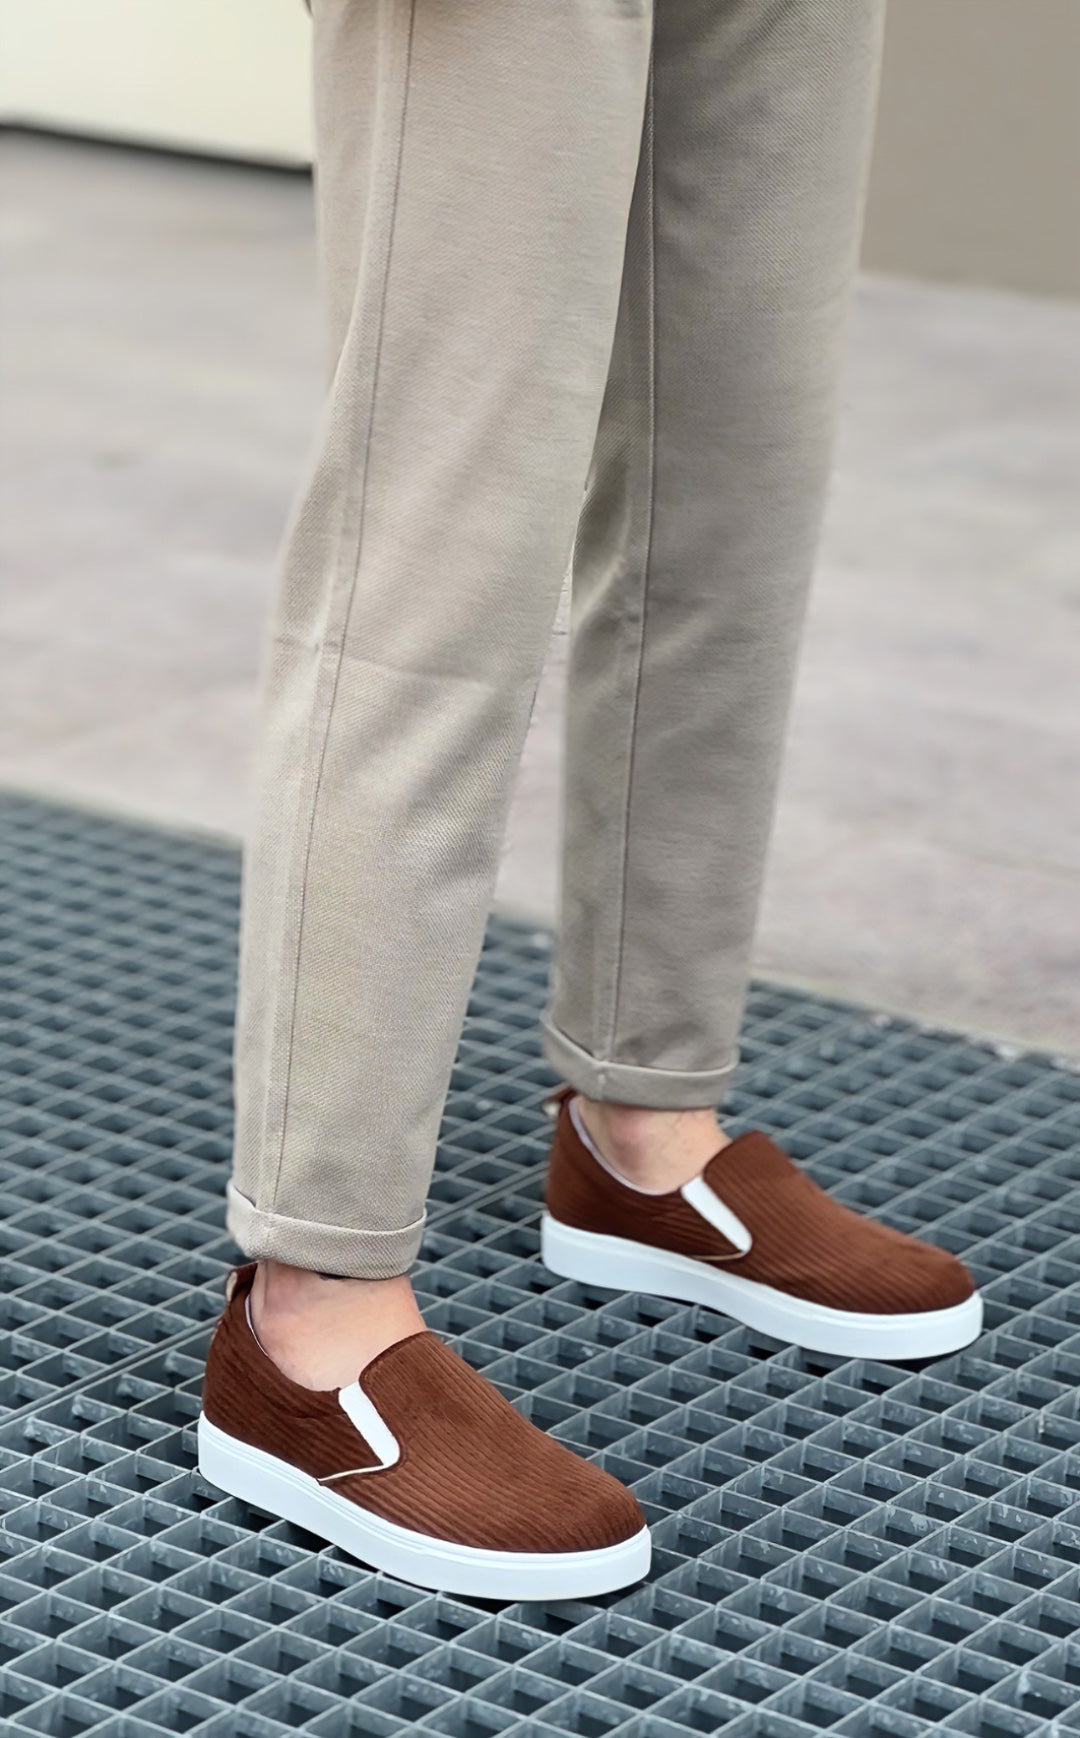 BA0339 Laceless Velvet Brown White Sole Casual Men's Shoes - STREETMODE ™